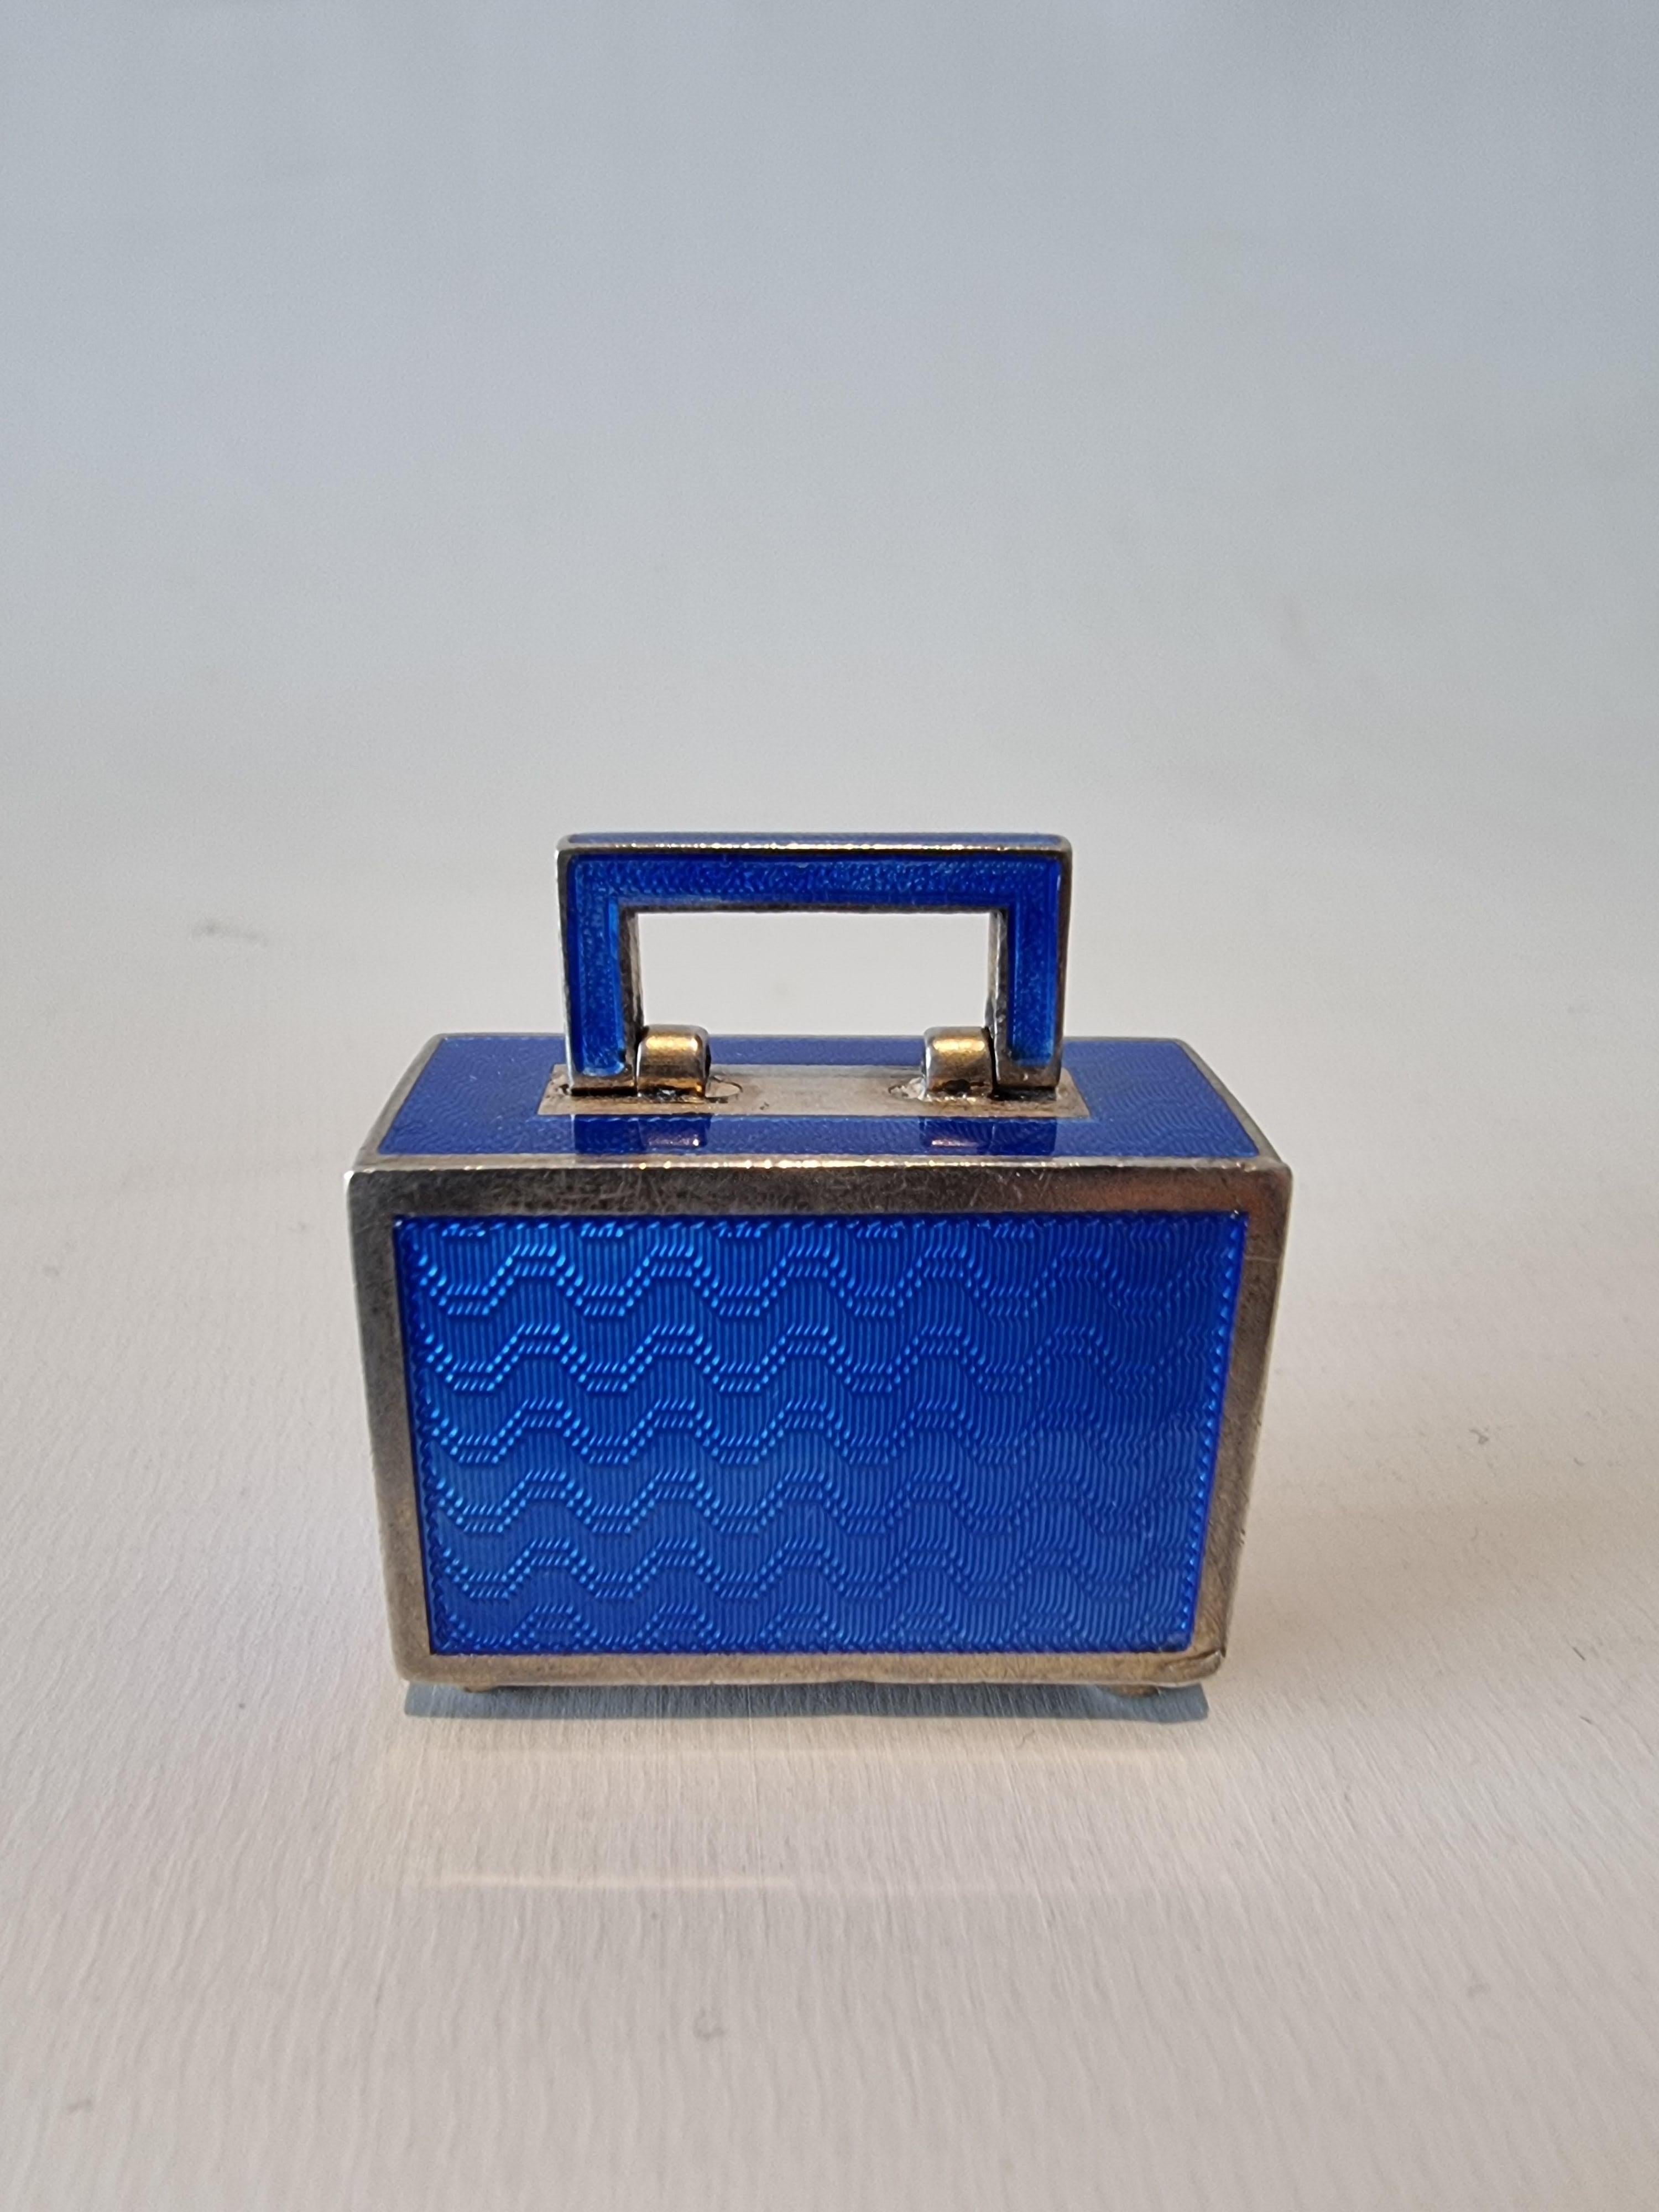 Early 20th Century Silver and Blue sub miniature Guilloche enamel Carriage Clock